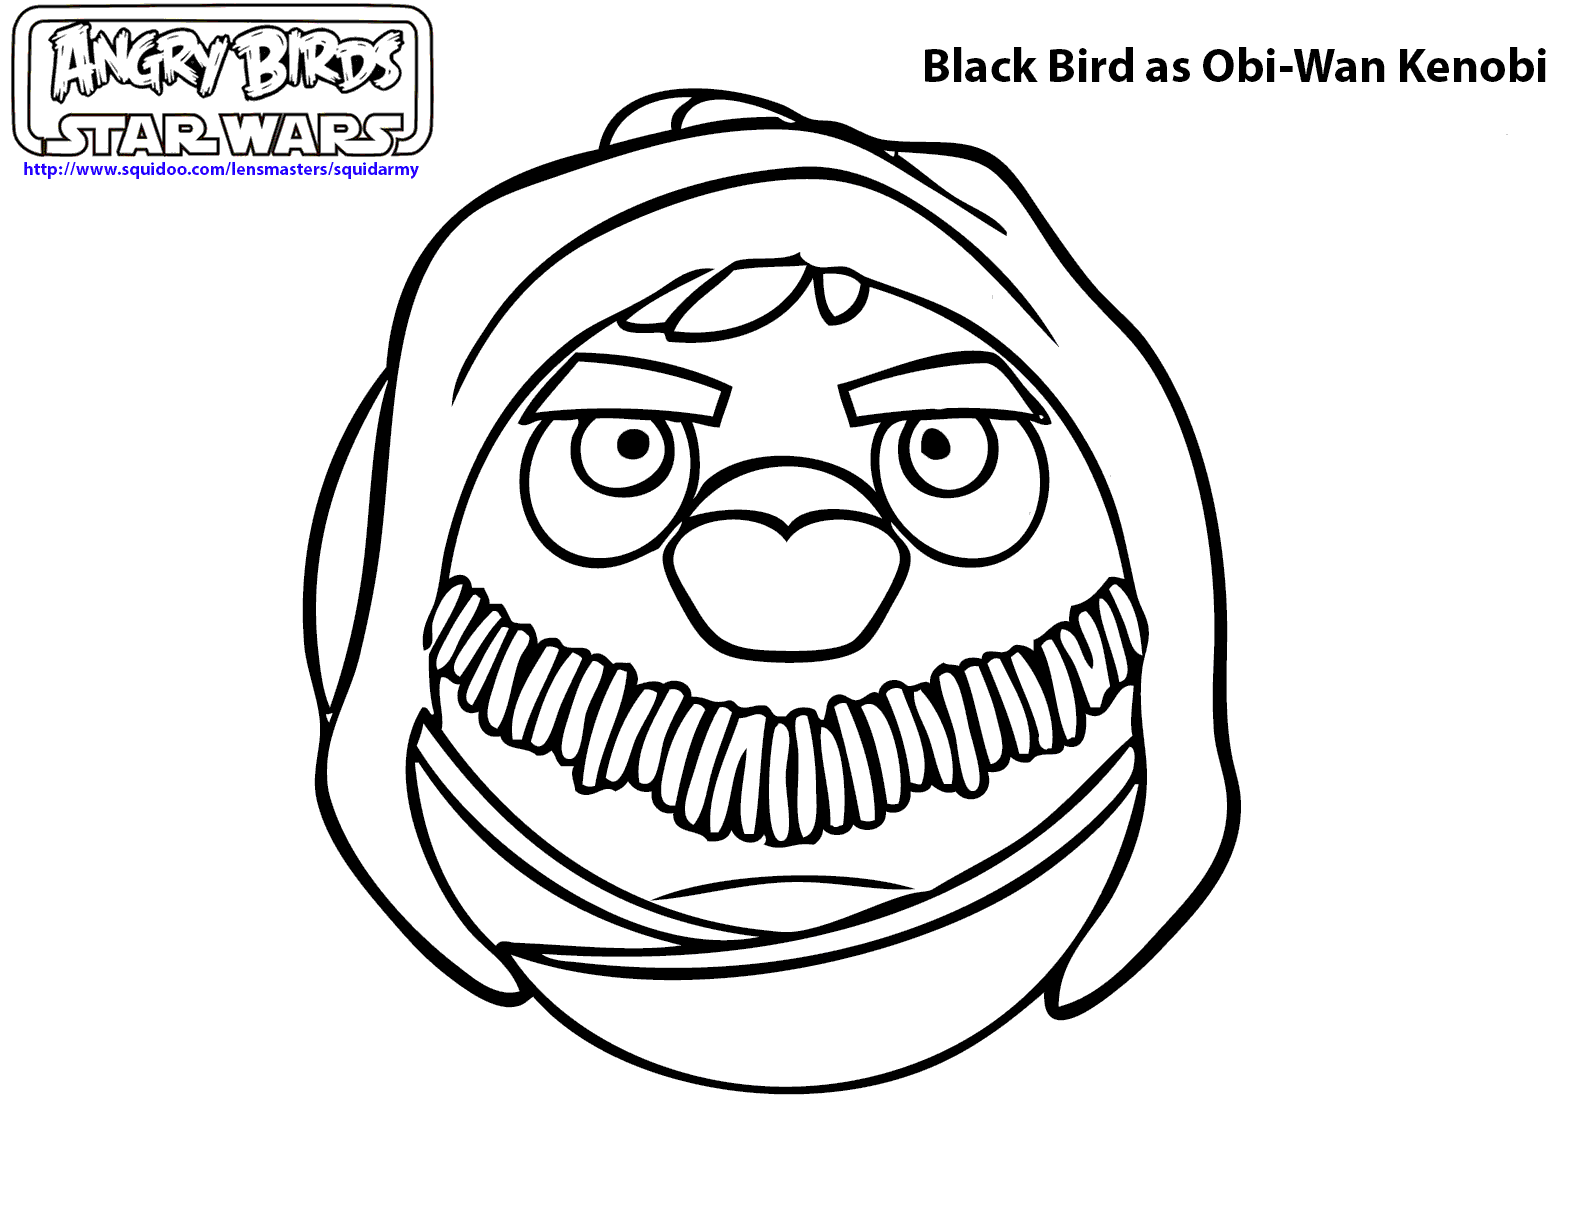 angry-birds-star-wars-coloring-pages-black-birds | Color A Sketch